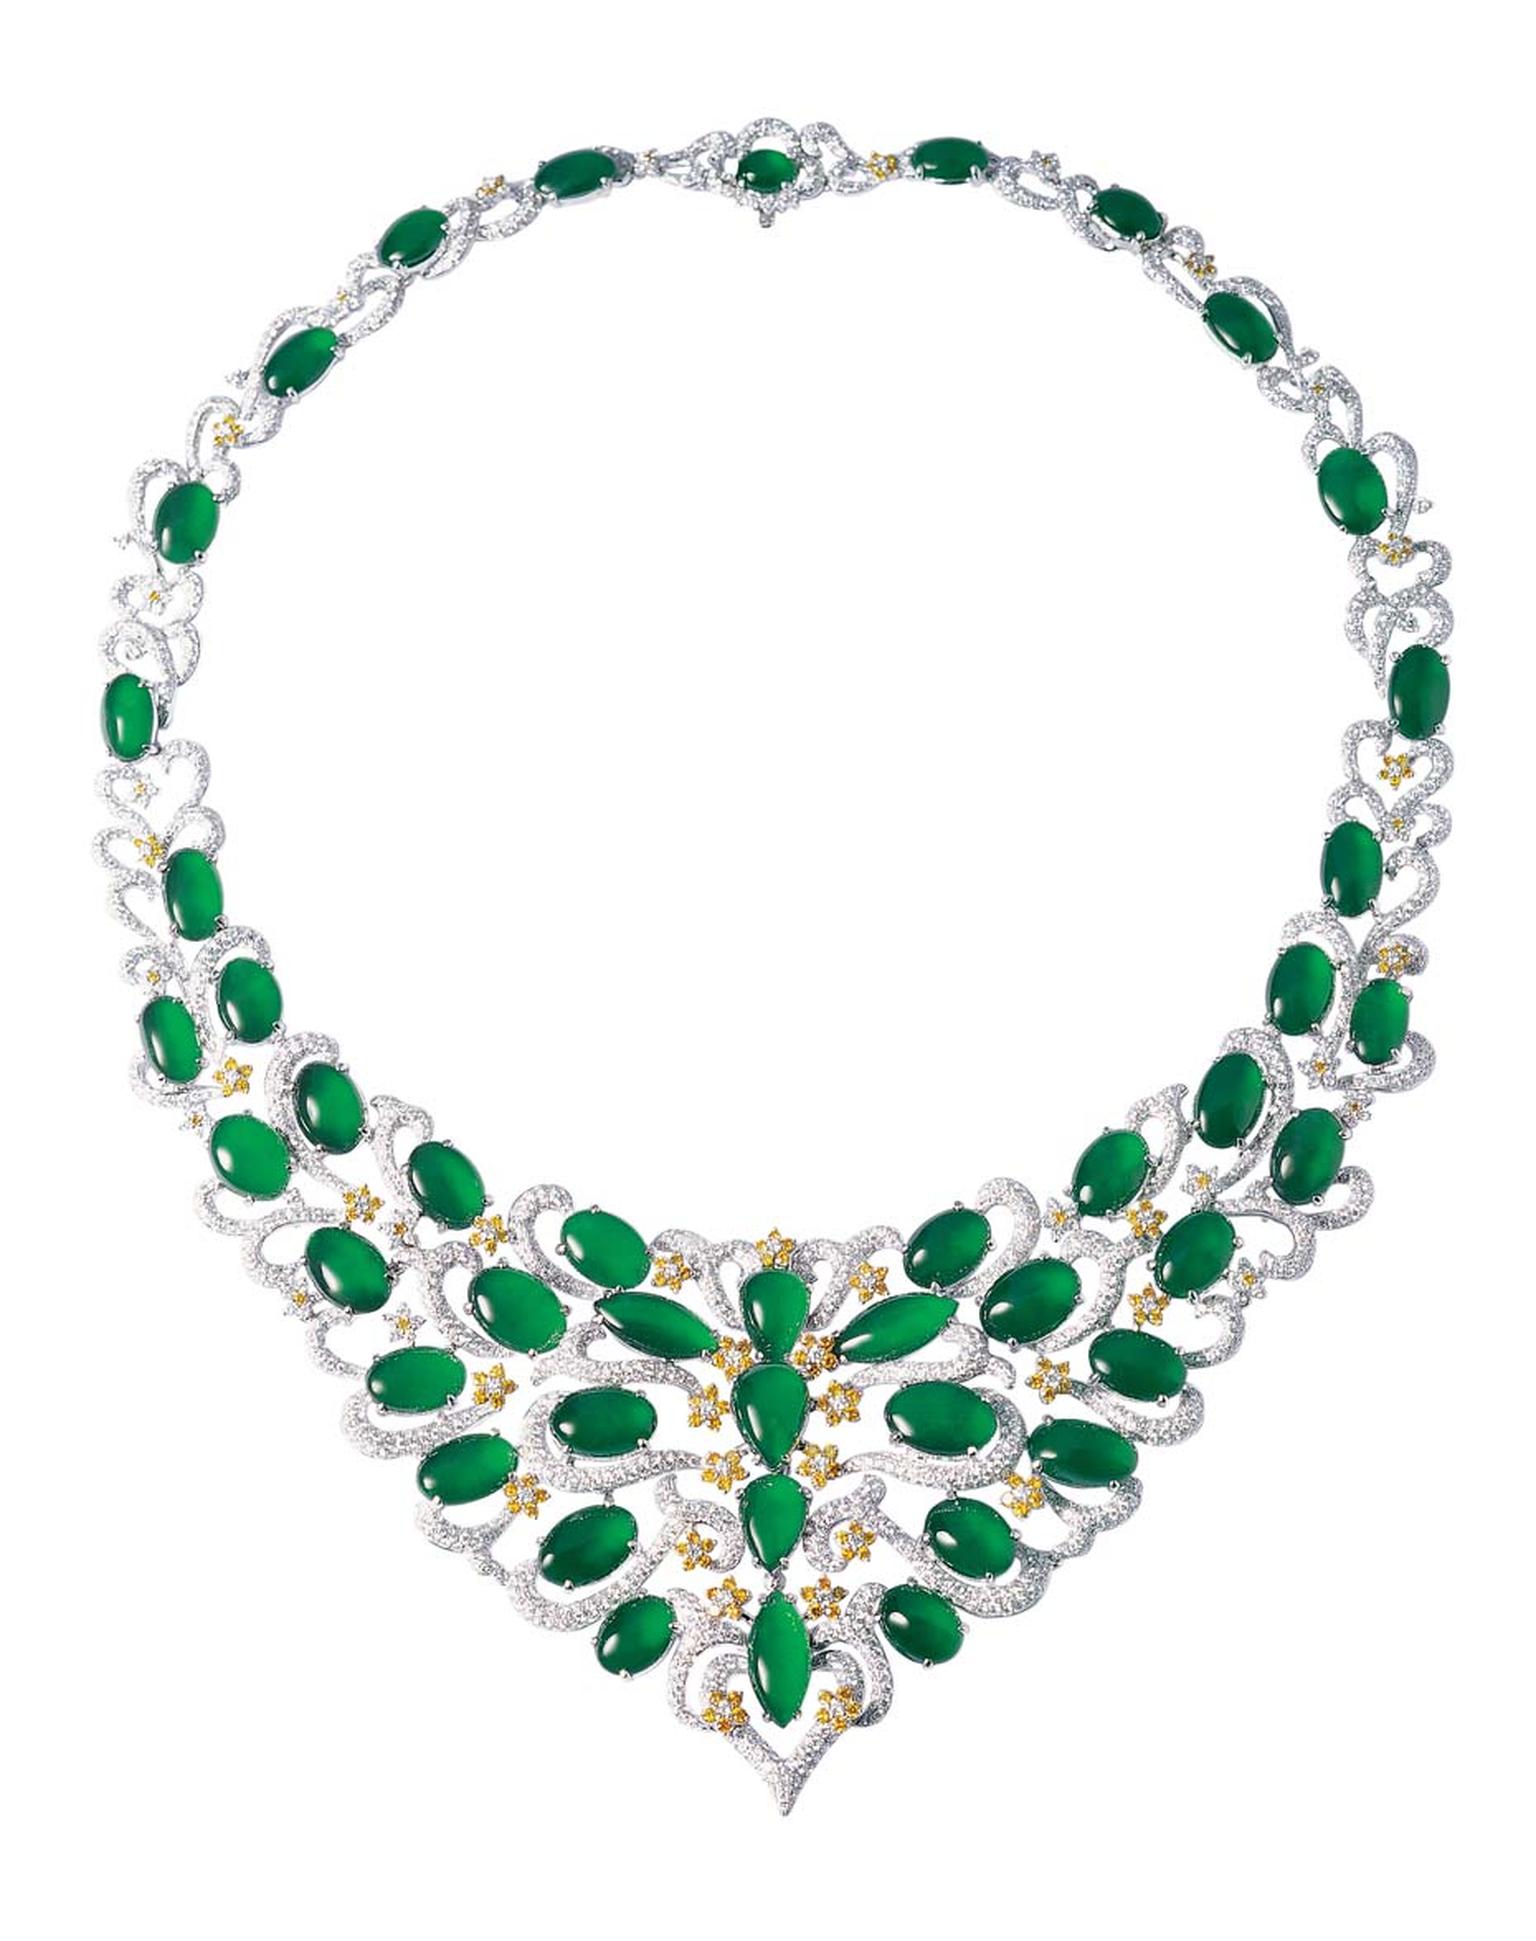 Zhaoyi's mouthwatering jade jewellery debuts at Baselworld | The ...